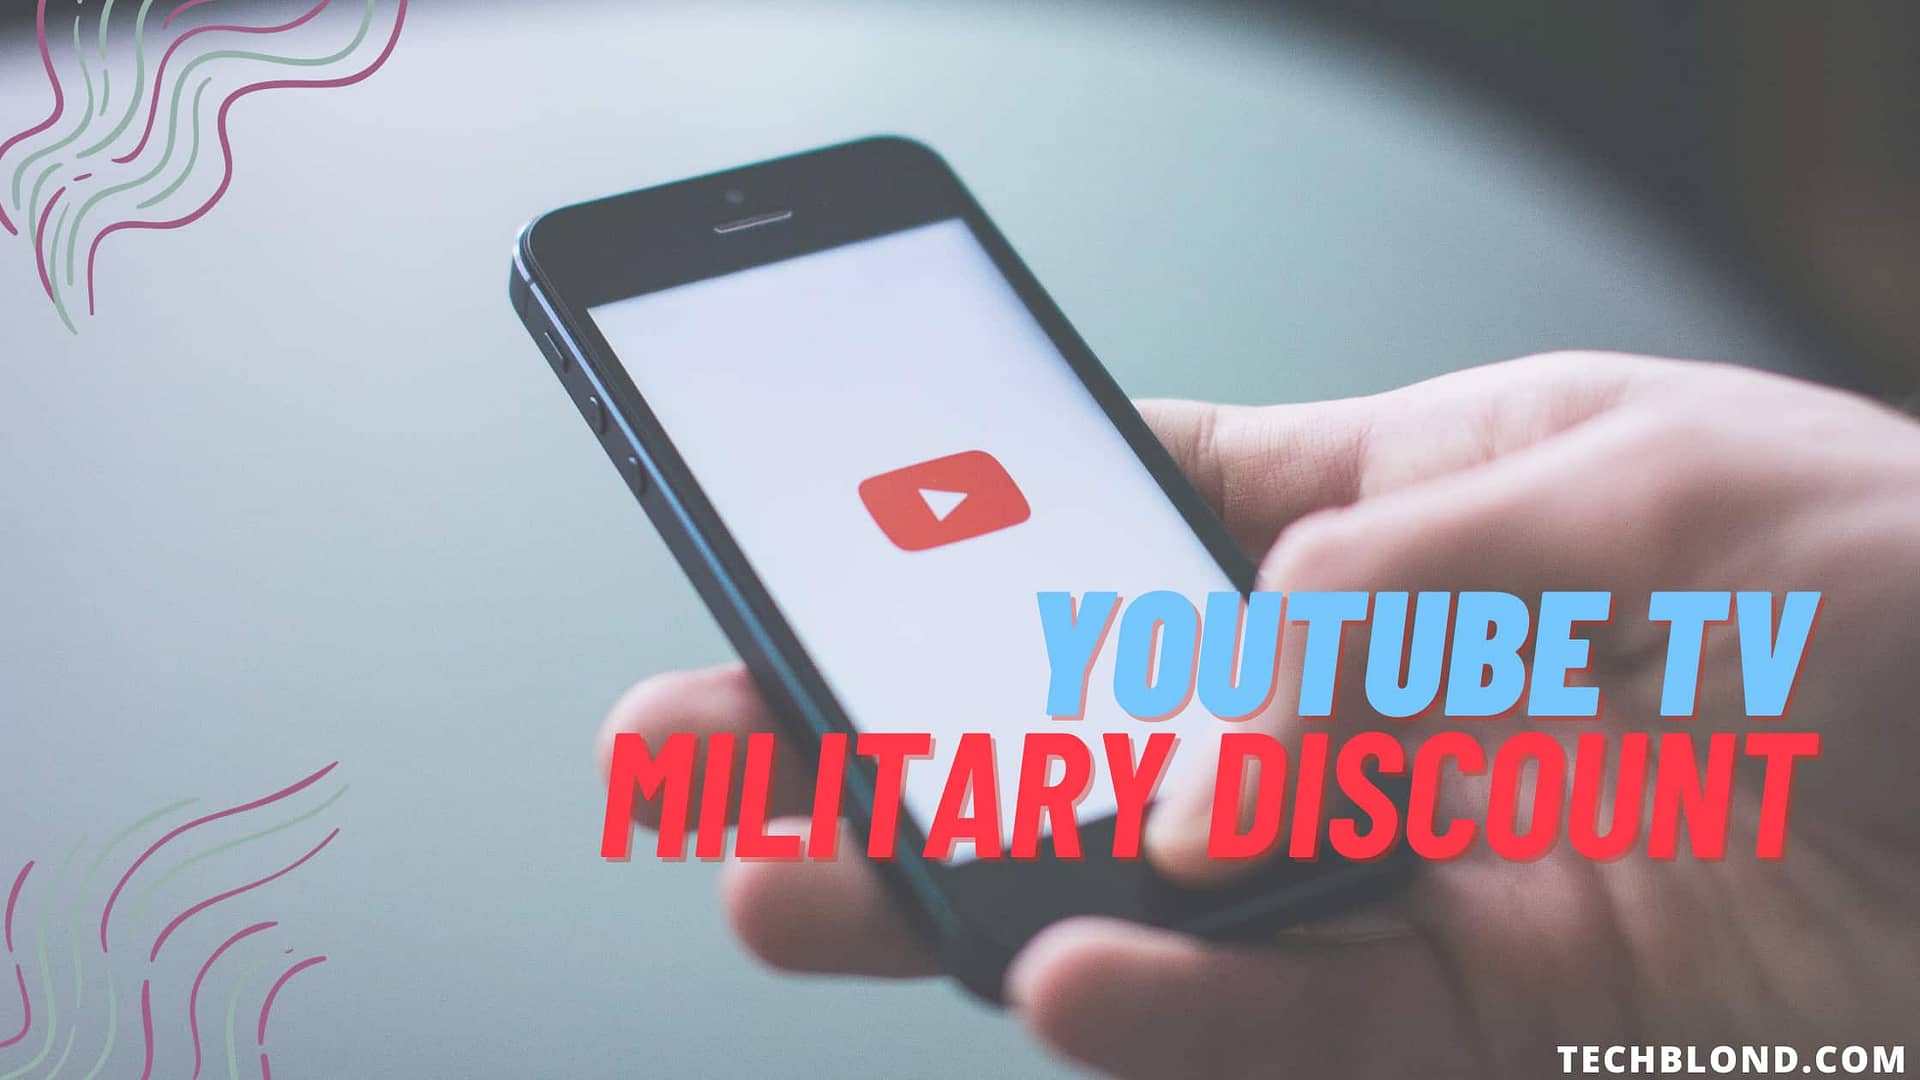 YouTube TV Military Discount